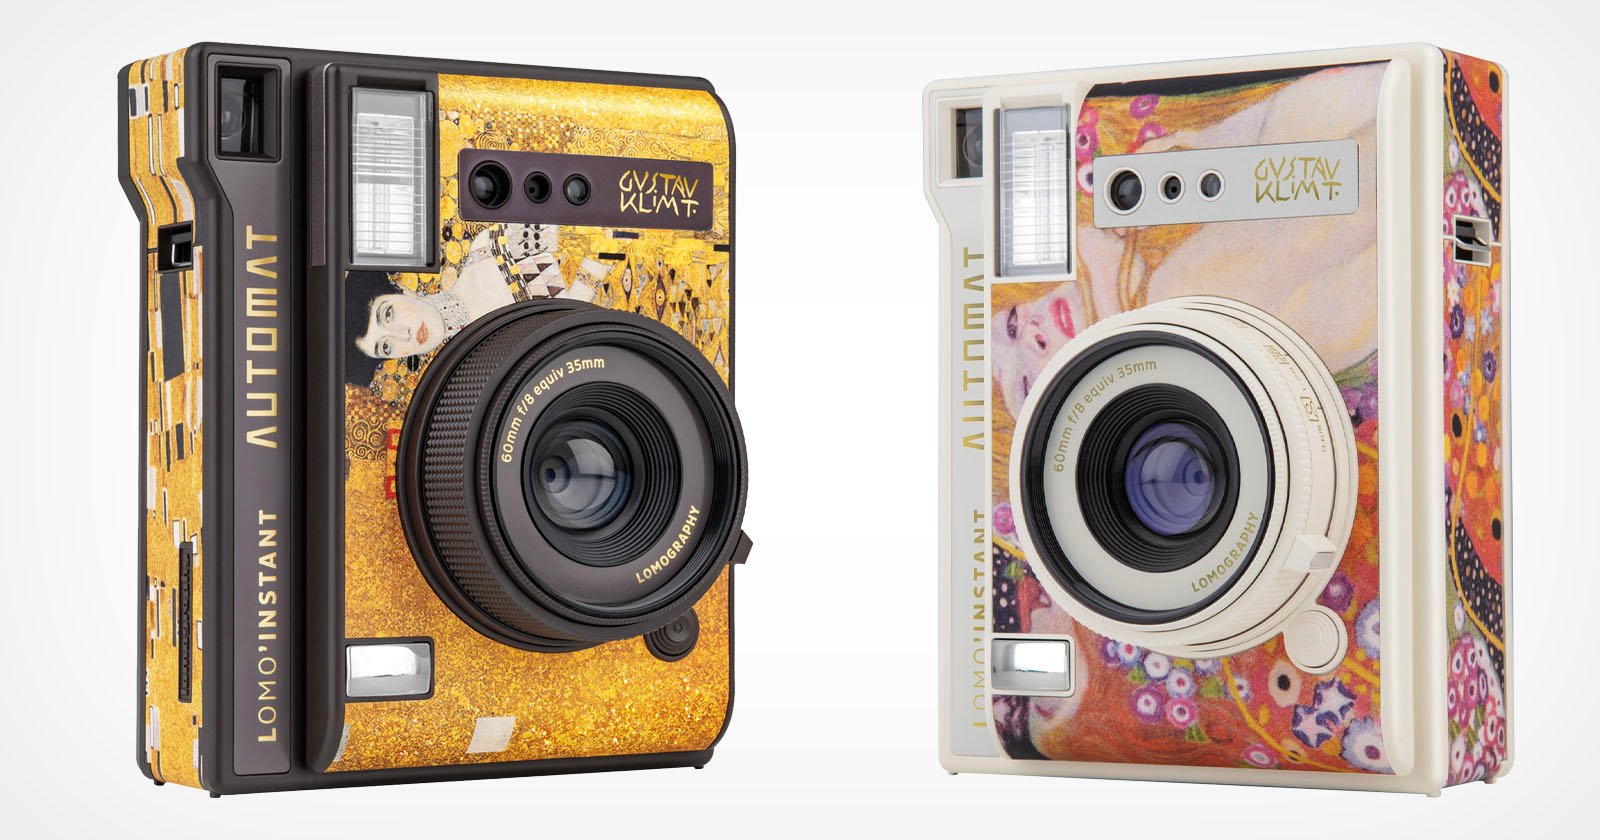 Two instant cameras from the Lomo'Instant Automat series. The camera on the left features Gustav Klimt's The Kiss with a black and gold design, while the camera on the right has a light color scheme with Klimt's The Maiden artwork.